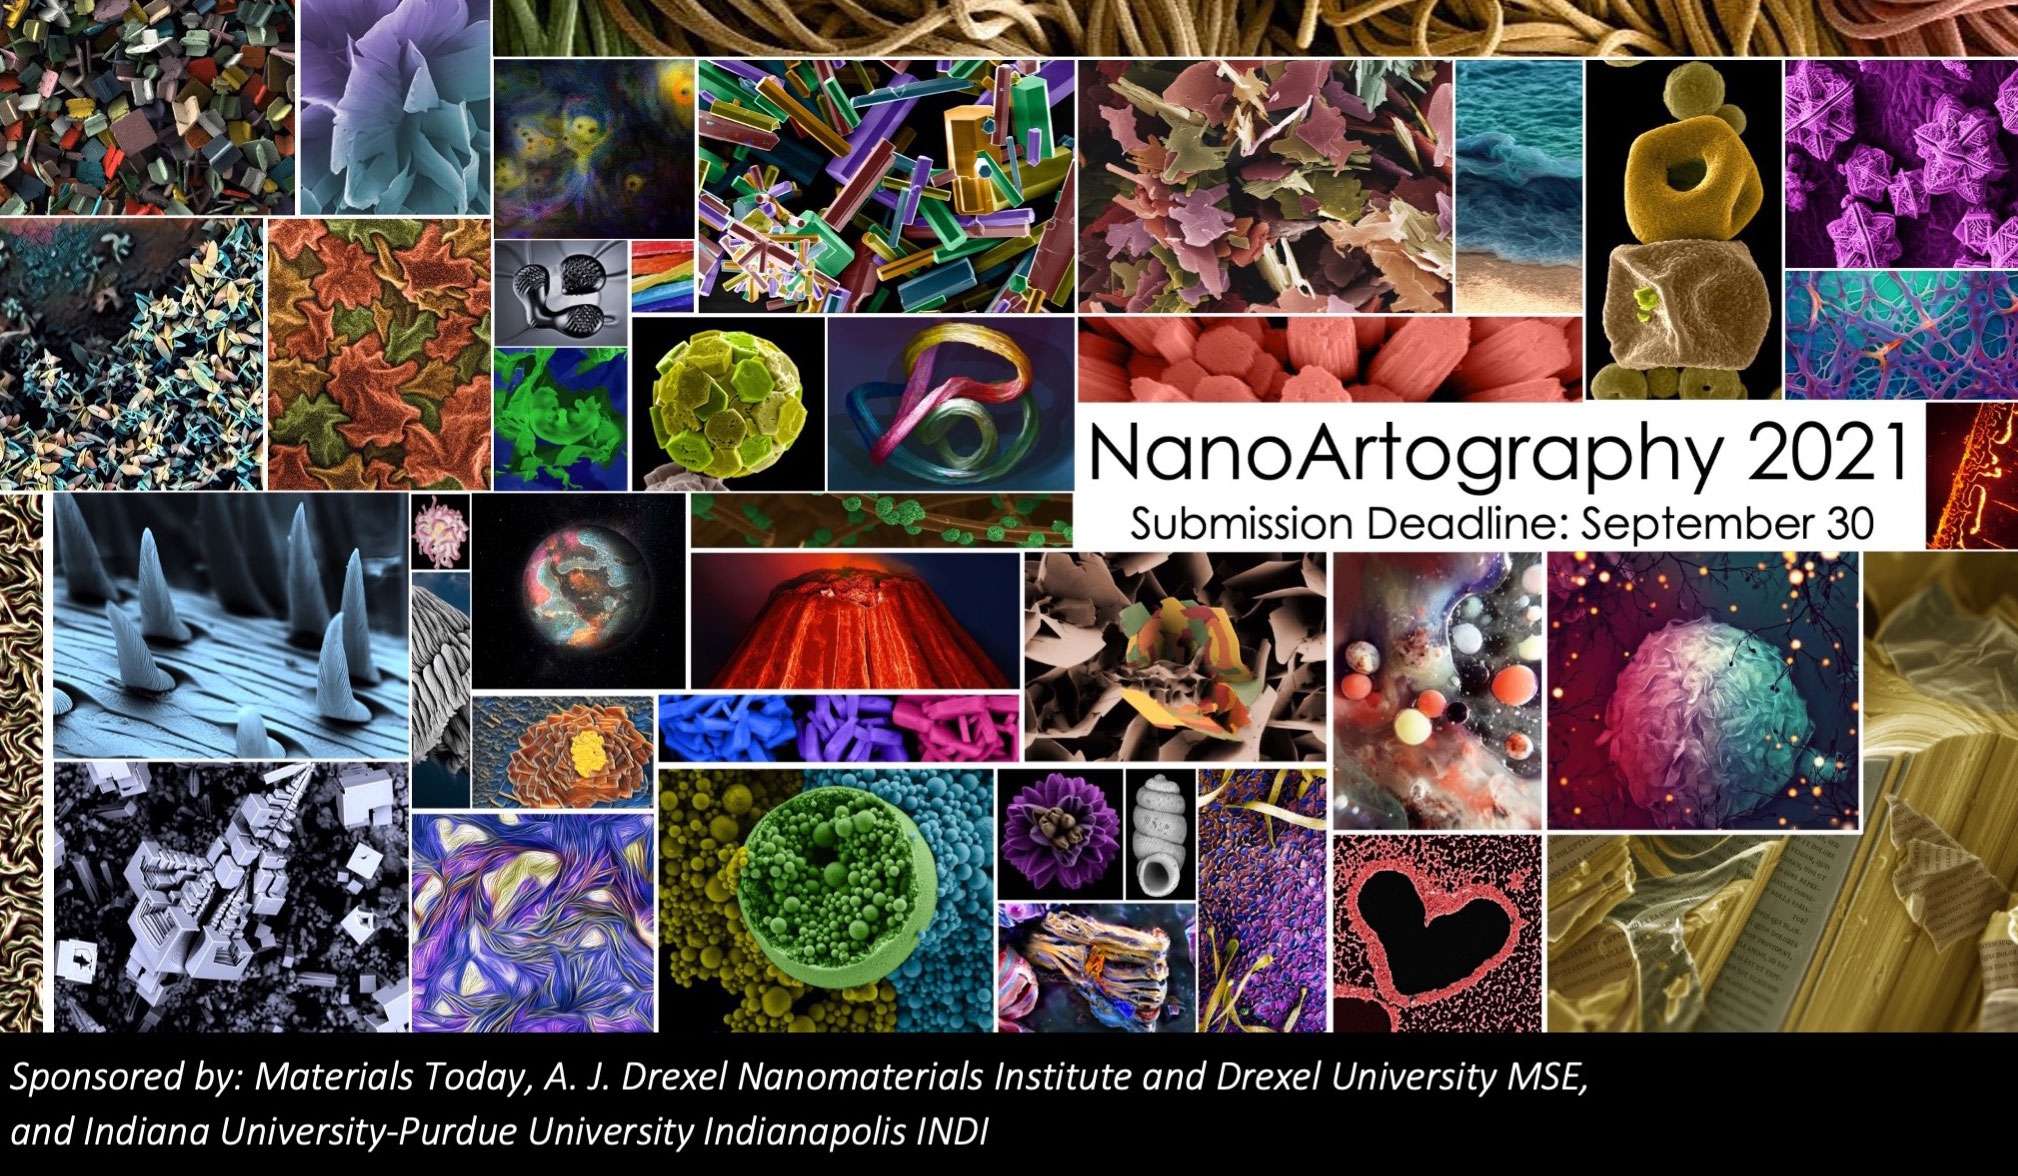 NanoArtography2021 Is Open for Submission